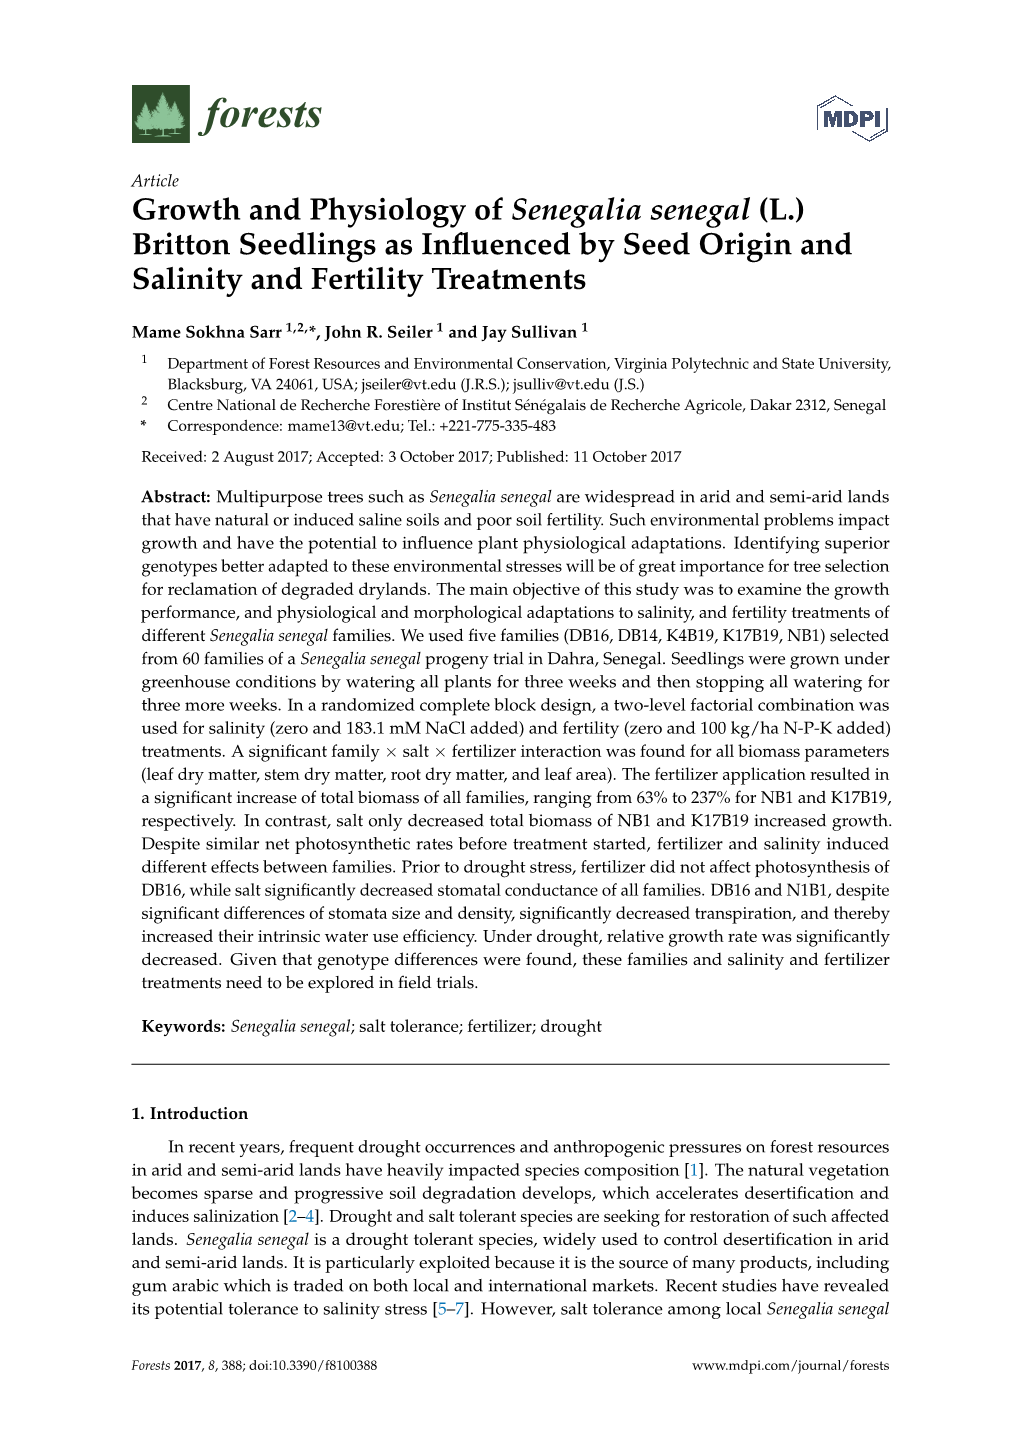 Growth and Physiology of Senegalia Senegal (L.) Britton Seedlings As Inﬂuenced by Seed Origin and Salinity and Fertility Treatments